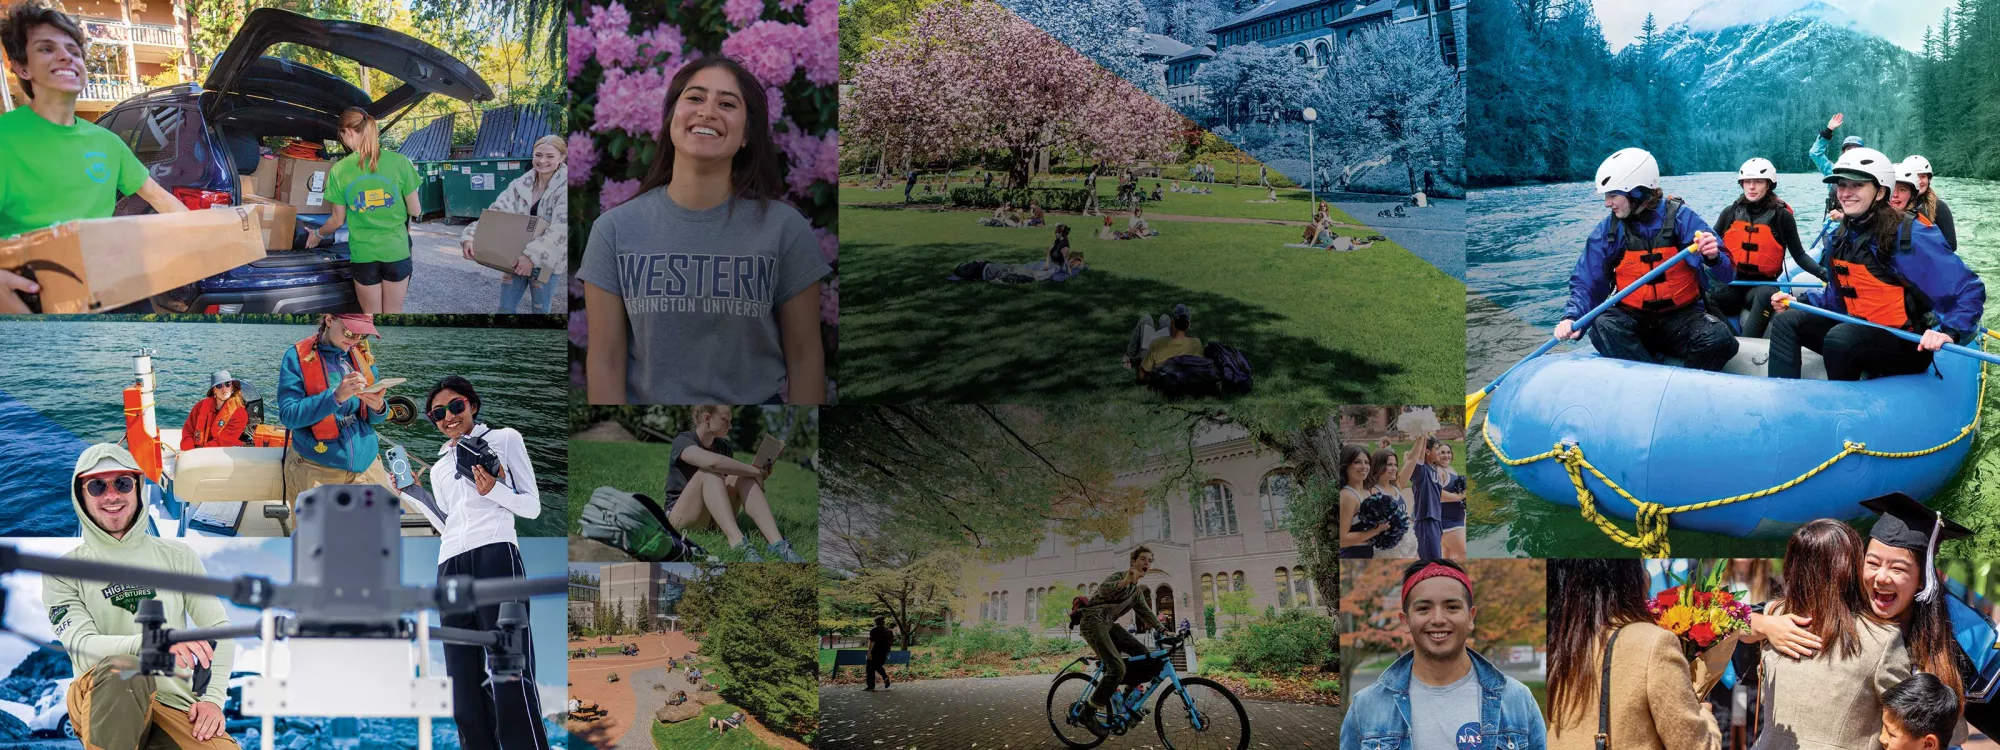 collage of two dozen photos showcasing the life and success of students attending Western Washington University, including moving into dorms, outdoor adventures on bikes and boats, and graduation hugs